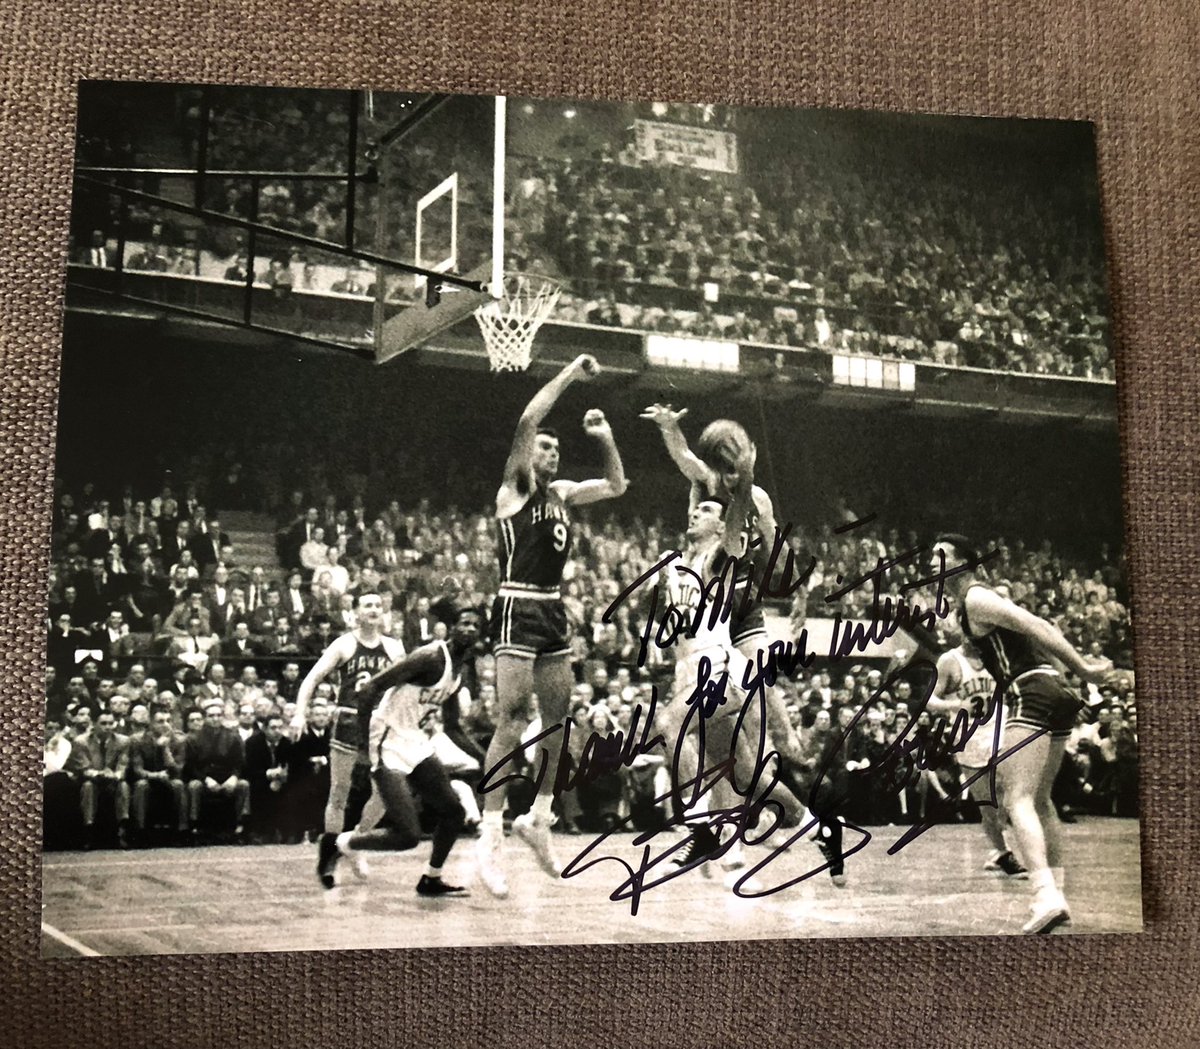 Thanks to @Hoophall @celtics Bob Cousy for signing my 8x10 photo! Another one that was lost in the holiday mail! #TTM #HOFer #Hobby #Collect #TTMSuccess #BleedGreen https://t.co/AmASGocC9c